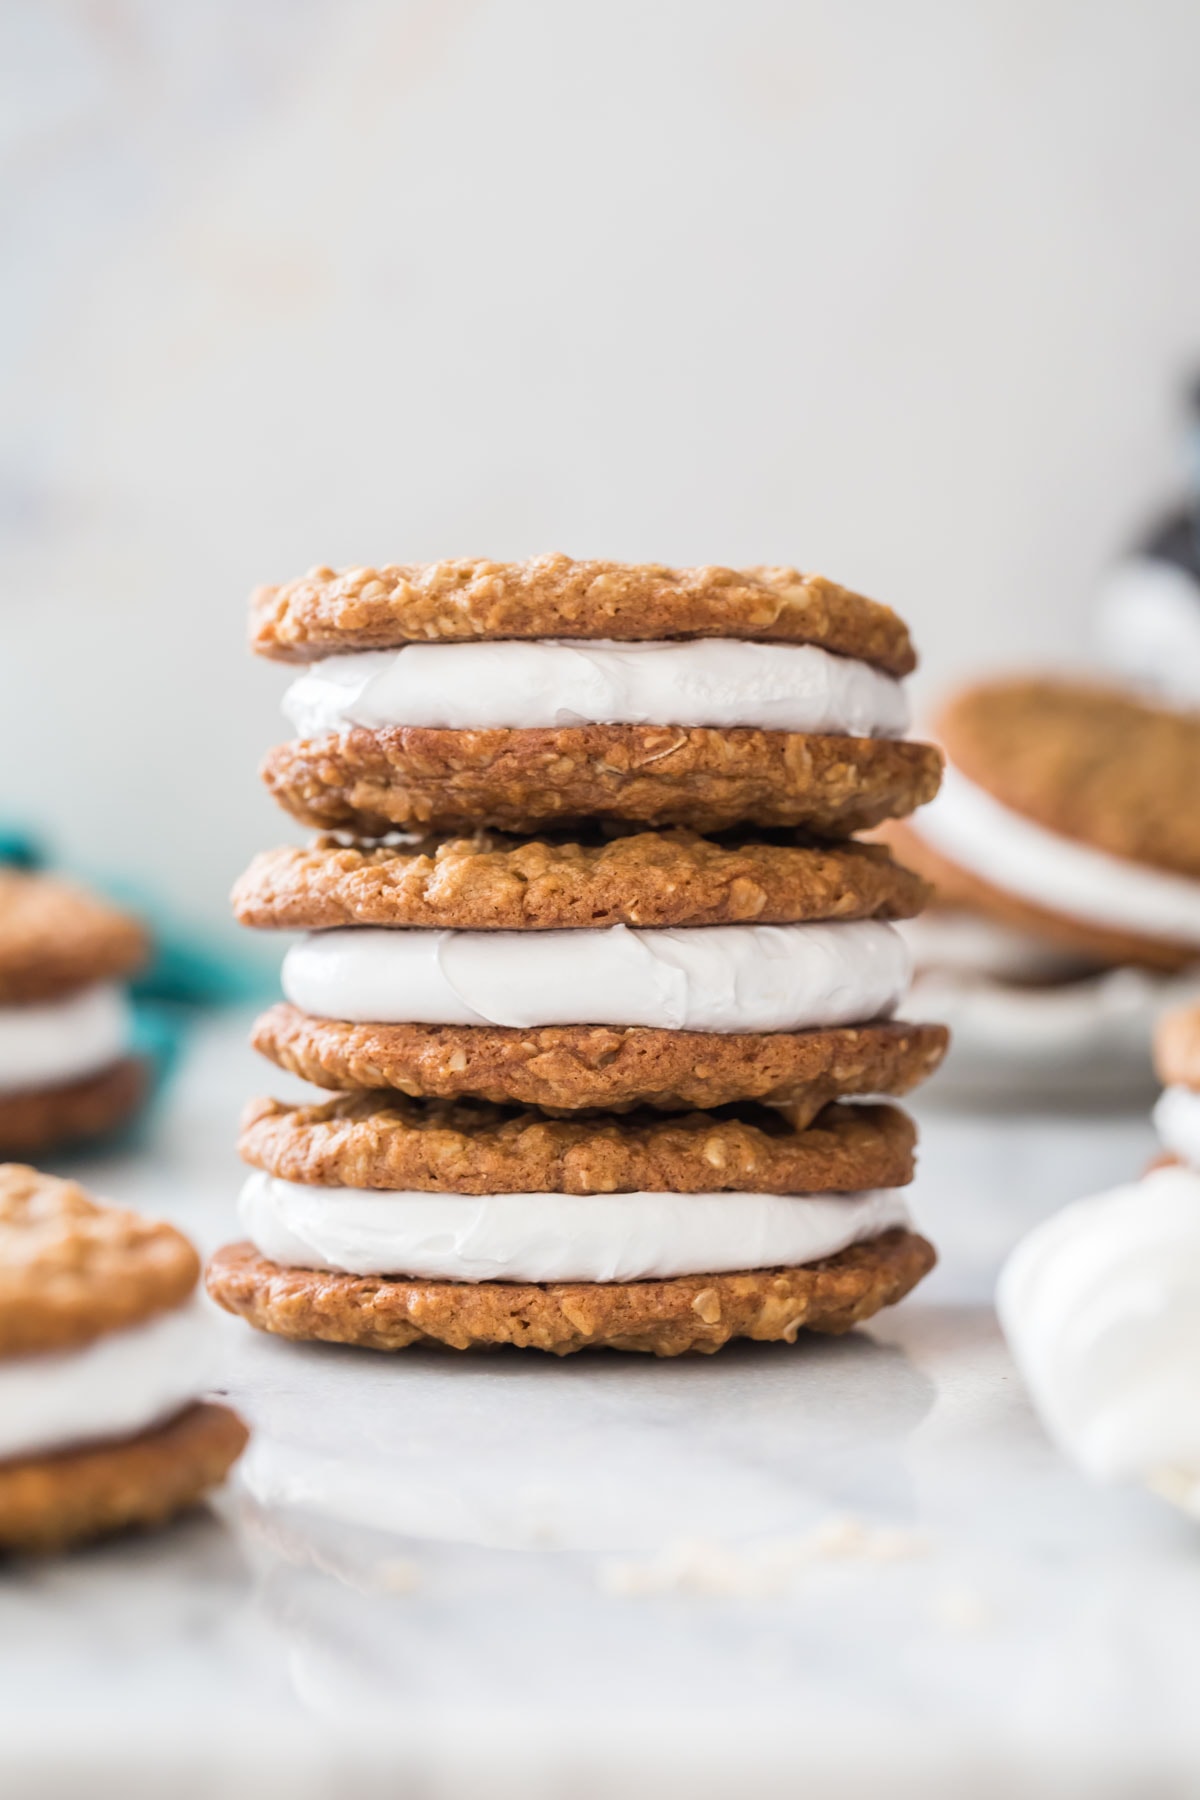 three oatmeal cream pies stacked vertically on top of each other with additional cream pies in the foreground and background